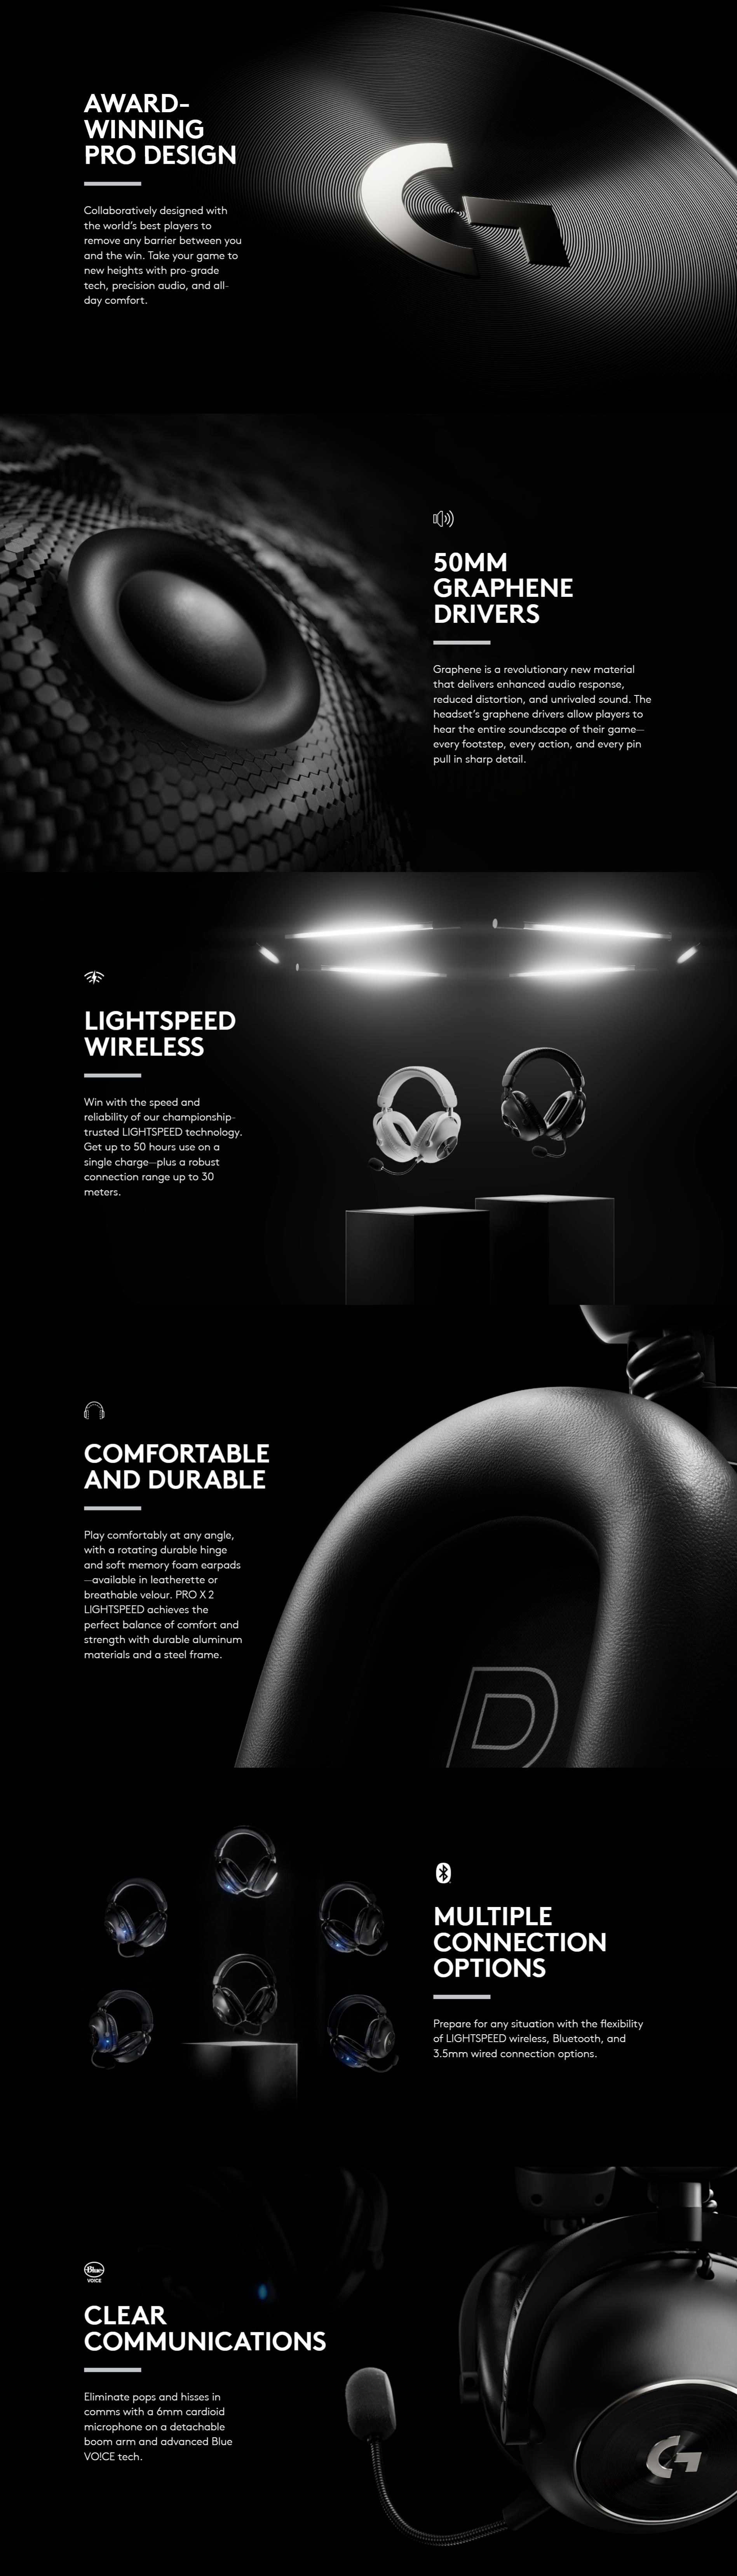 A large marketing image providing additional information about the product Logitech PRO X 2 LIGHTSPEED Wireless Gaming Headset - White - Additional alt info not provided